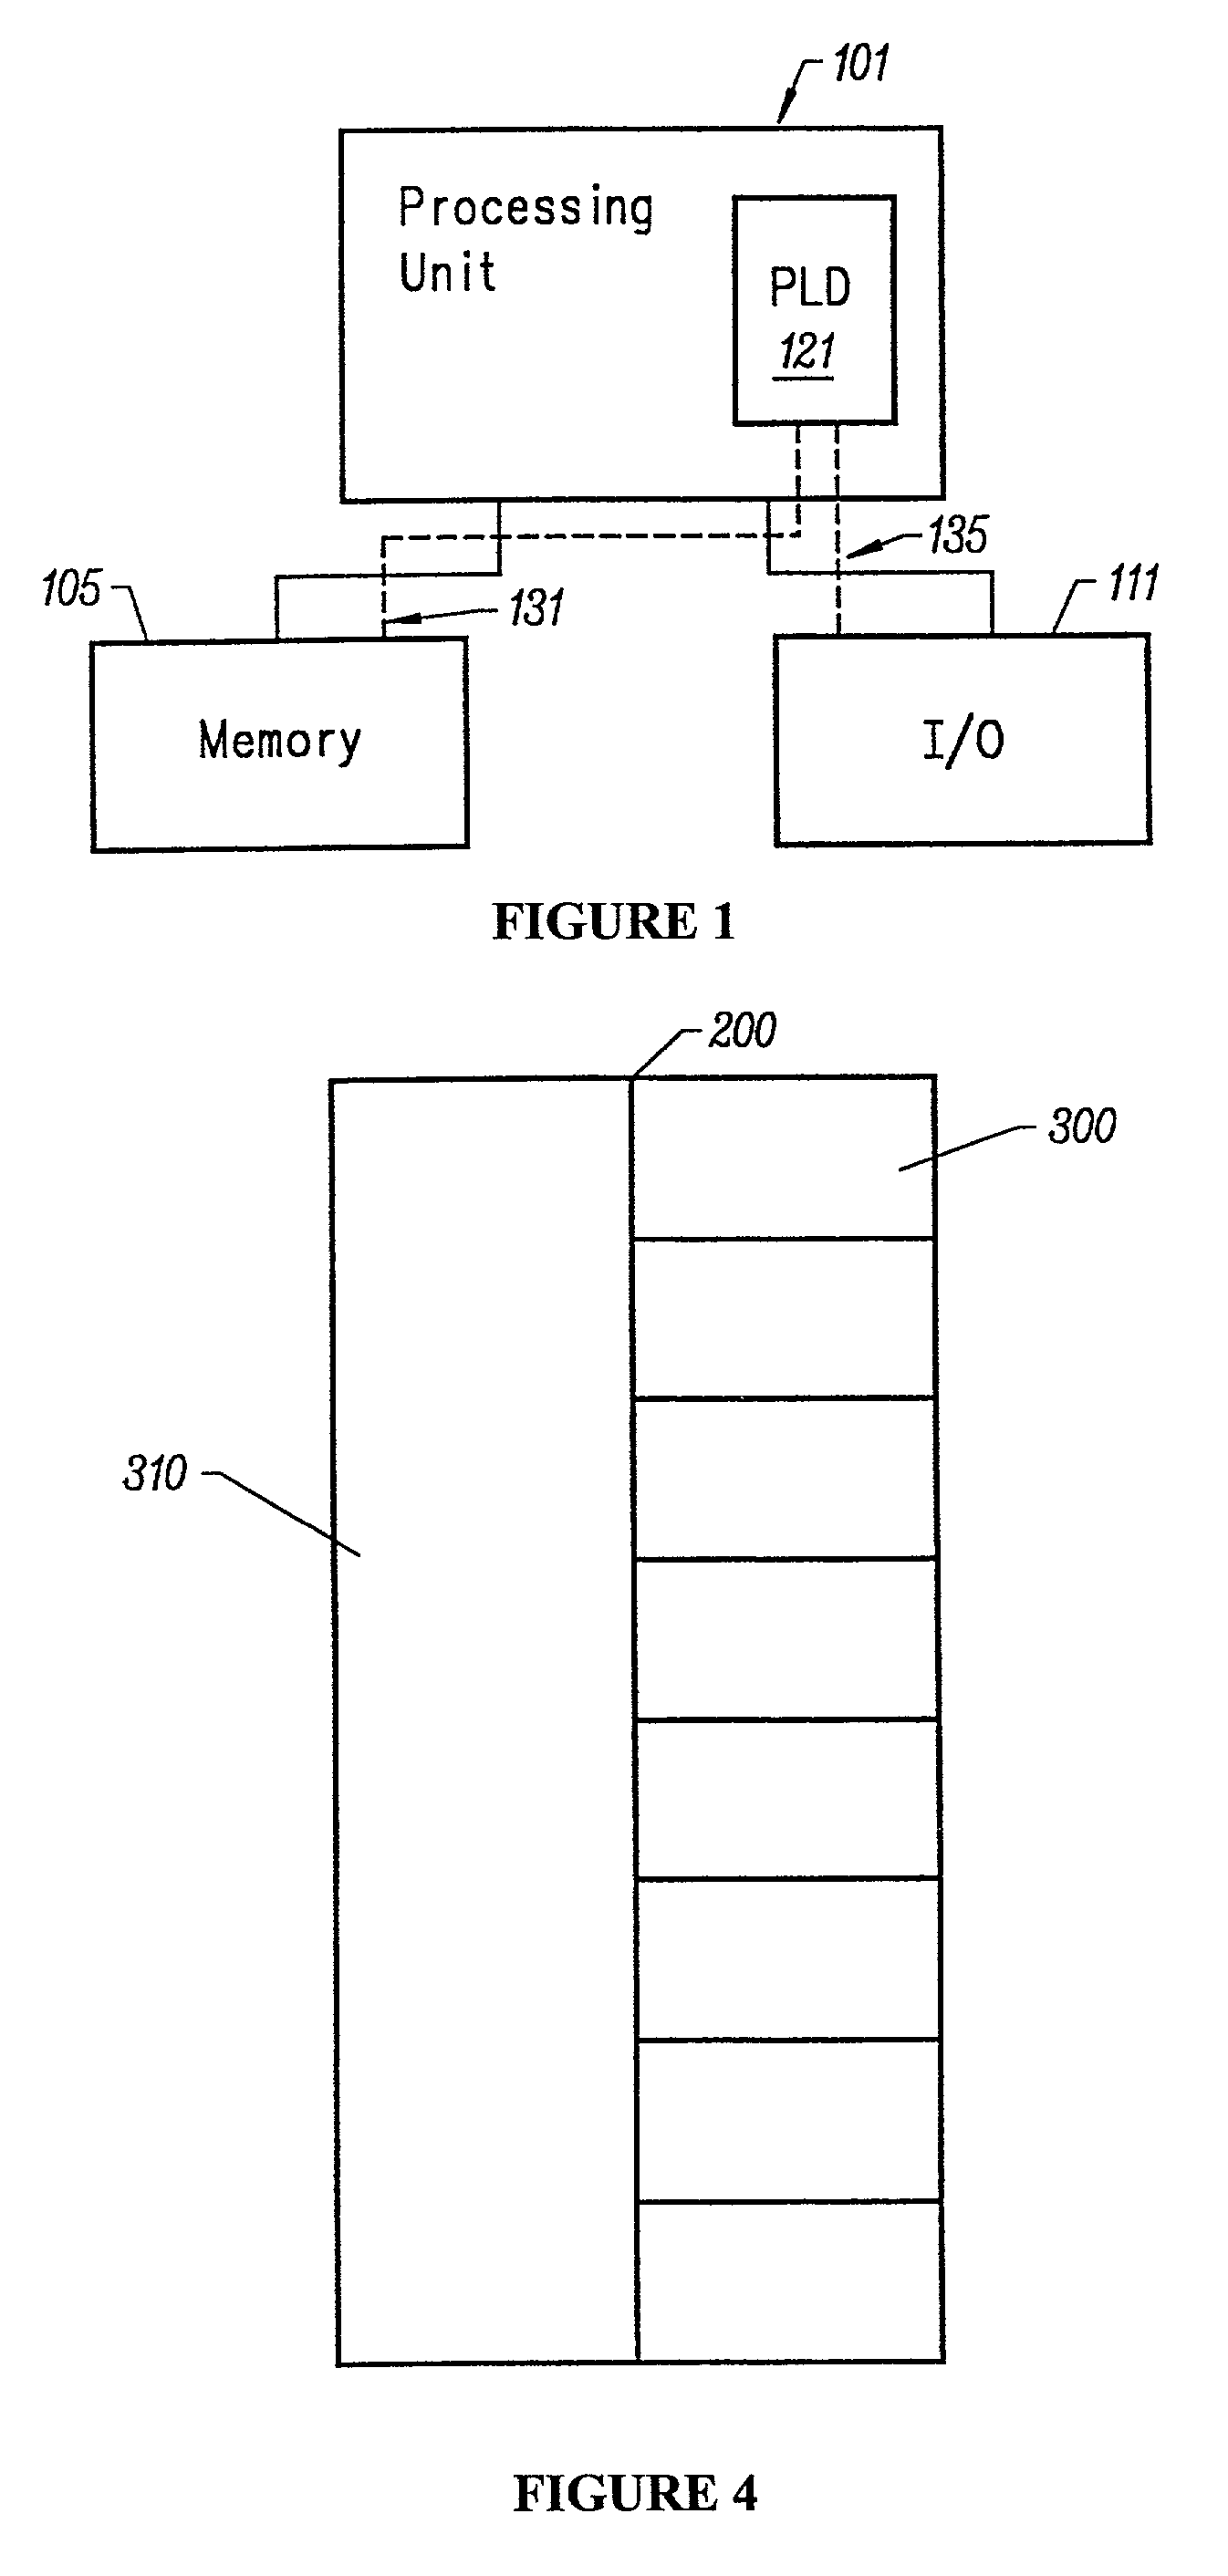 Embedded processor with watchdog timer for programmable logic